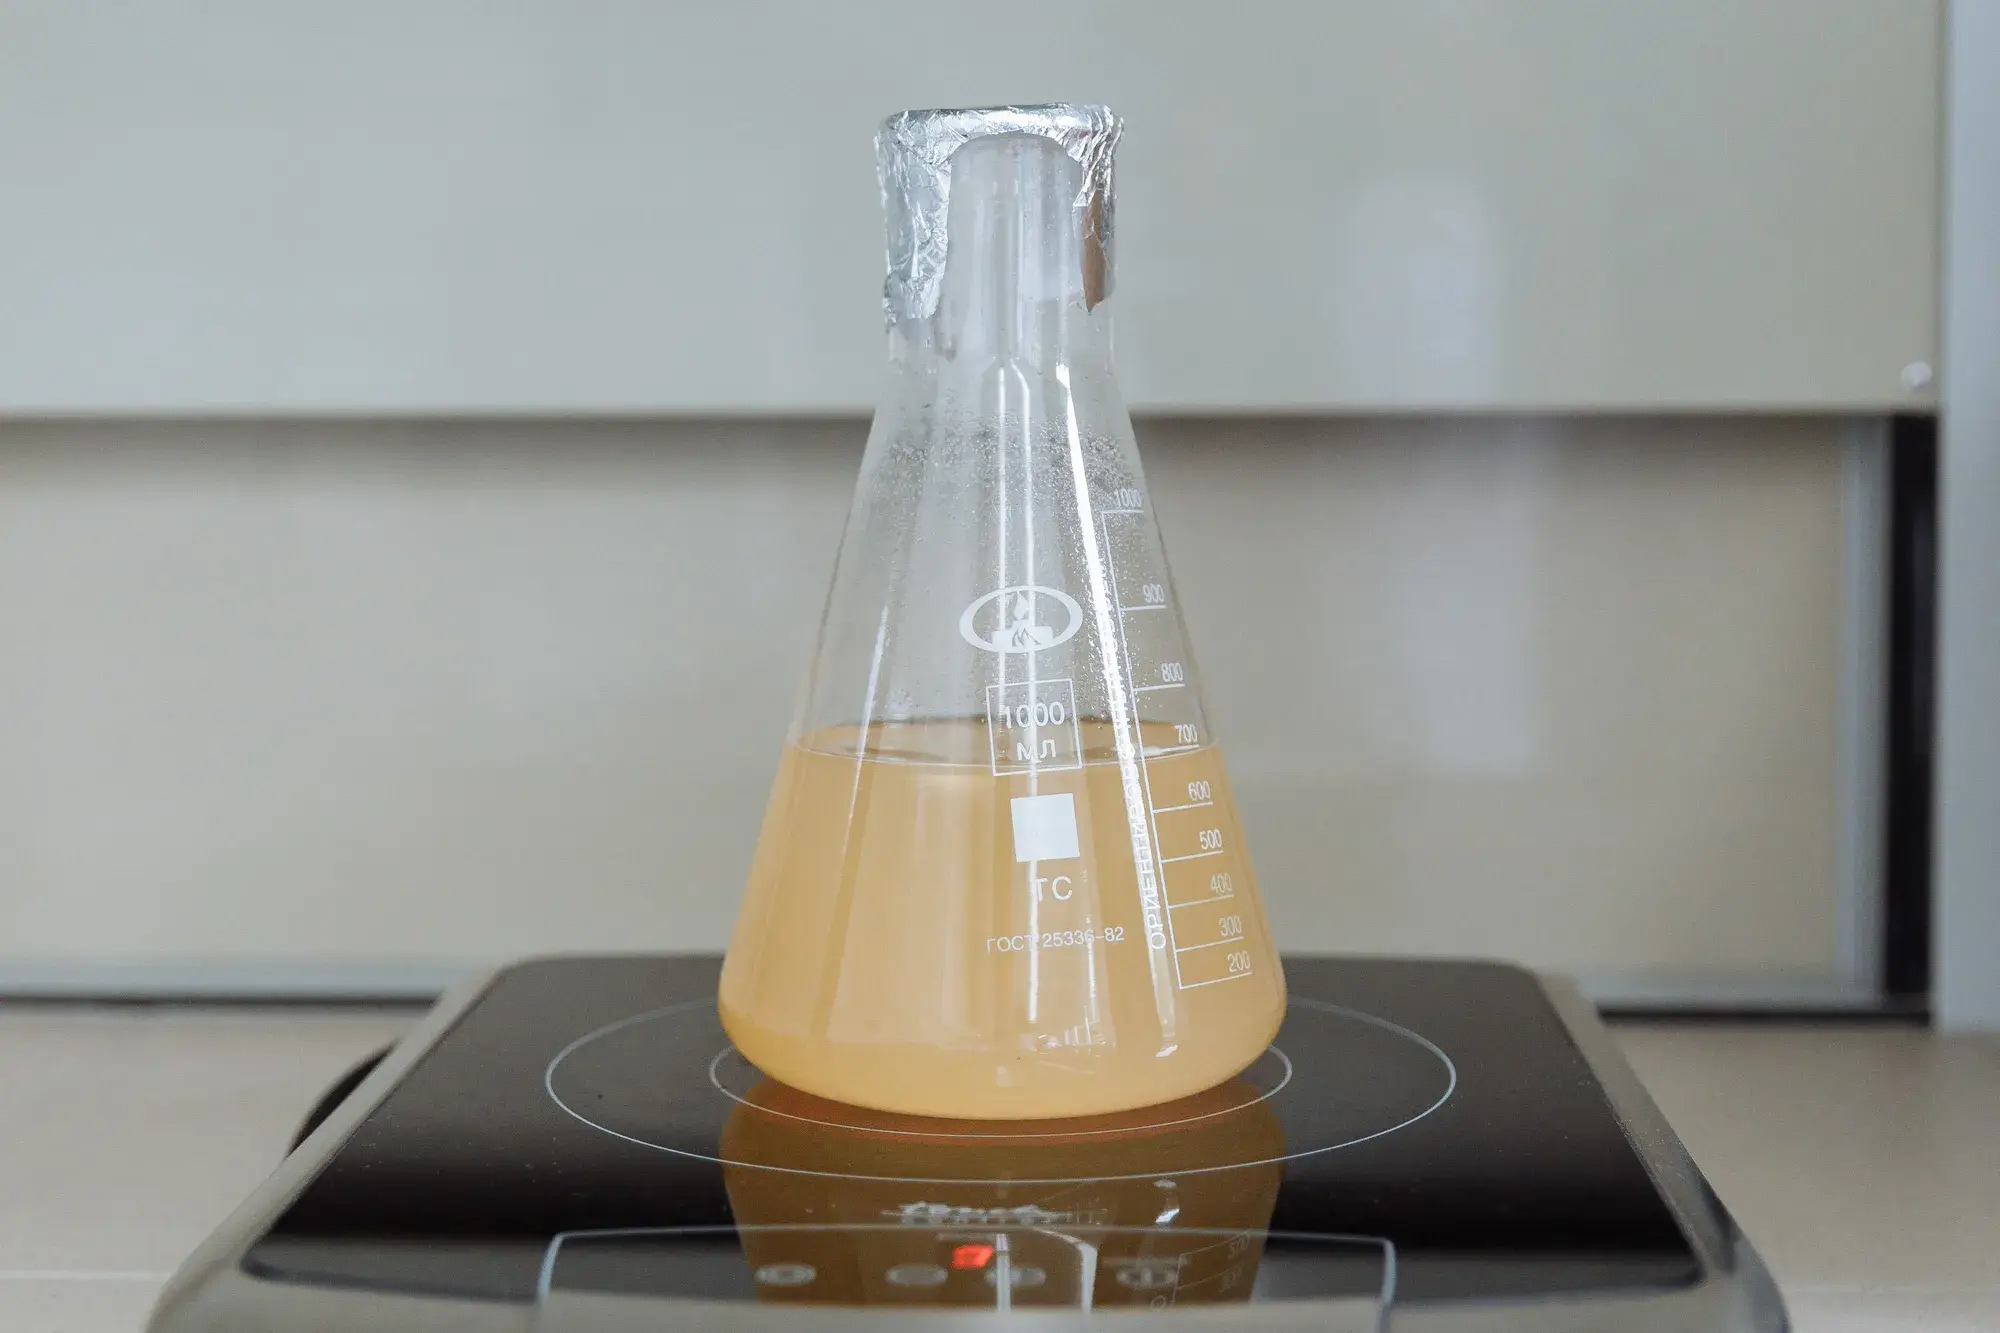 How to simply make a yeast starter